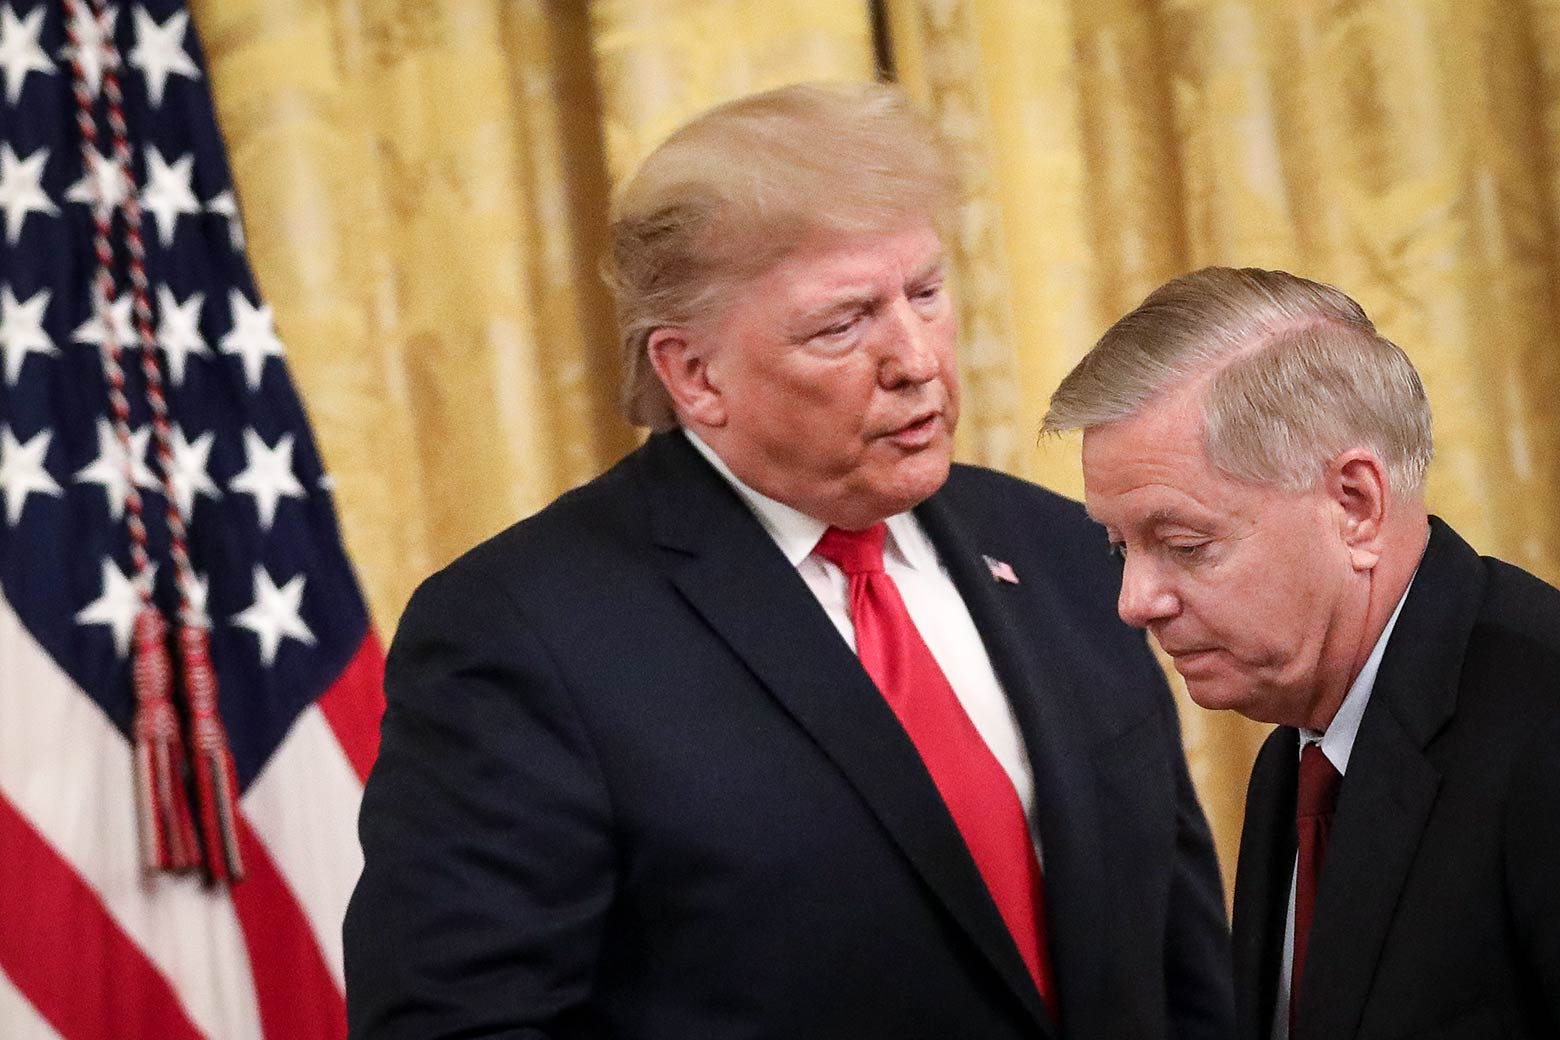 Donald Trump opens his mouth as if to talk as Lindsey Graham walks by. There is a gold curtain and an American flag behind them.